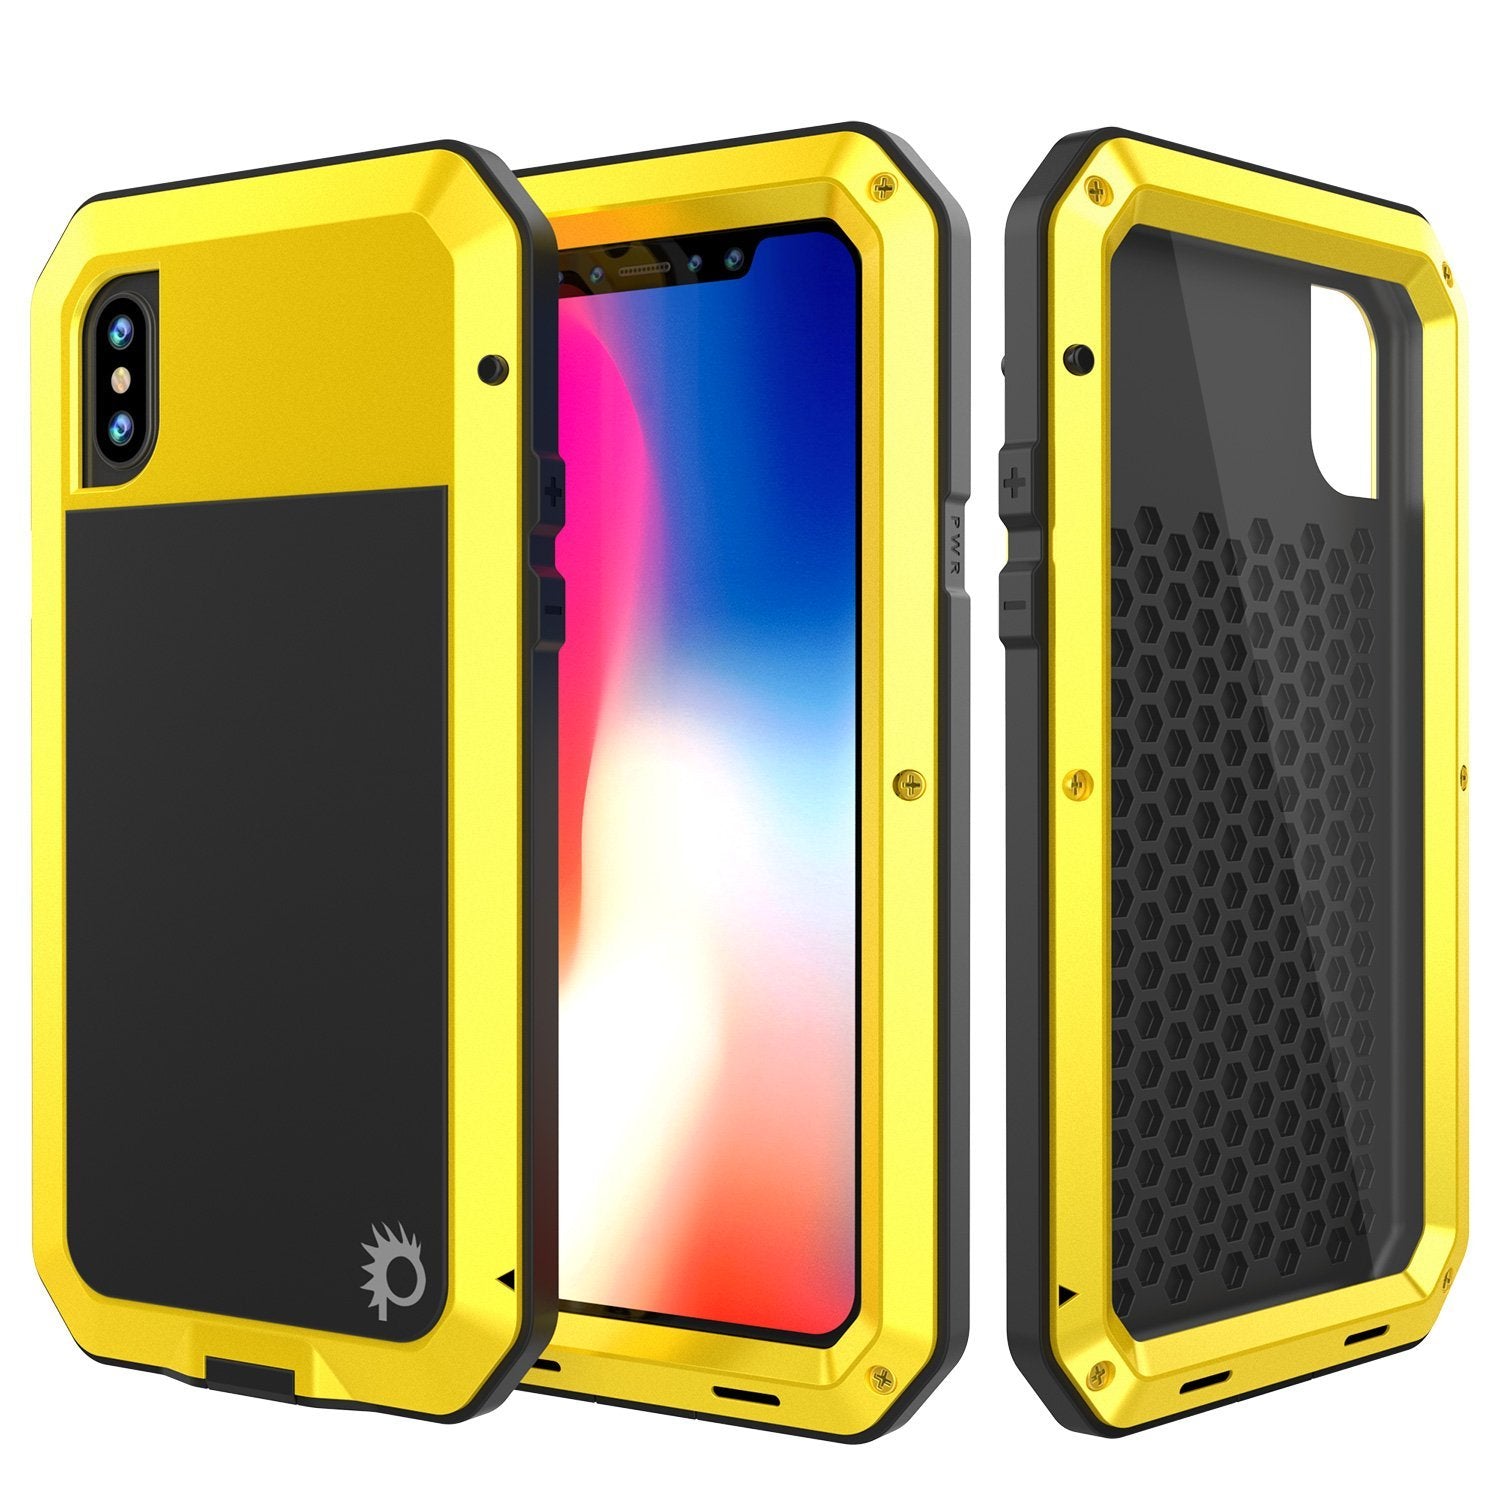 iPhone XR Metal Case, Heavy Duty Military Grade Armor Cover [shock proof] Full Body Hard [Neon]